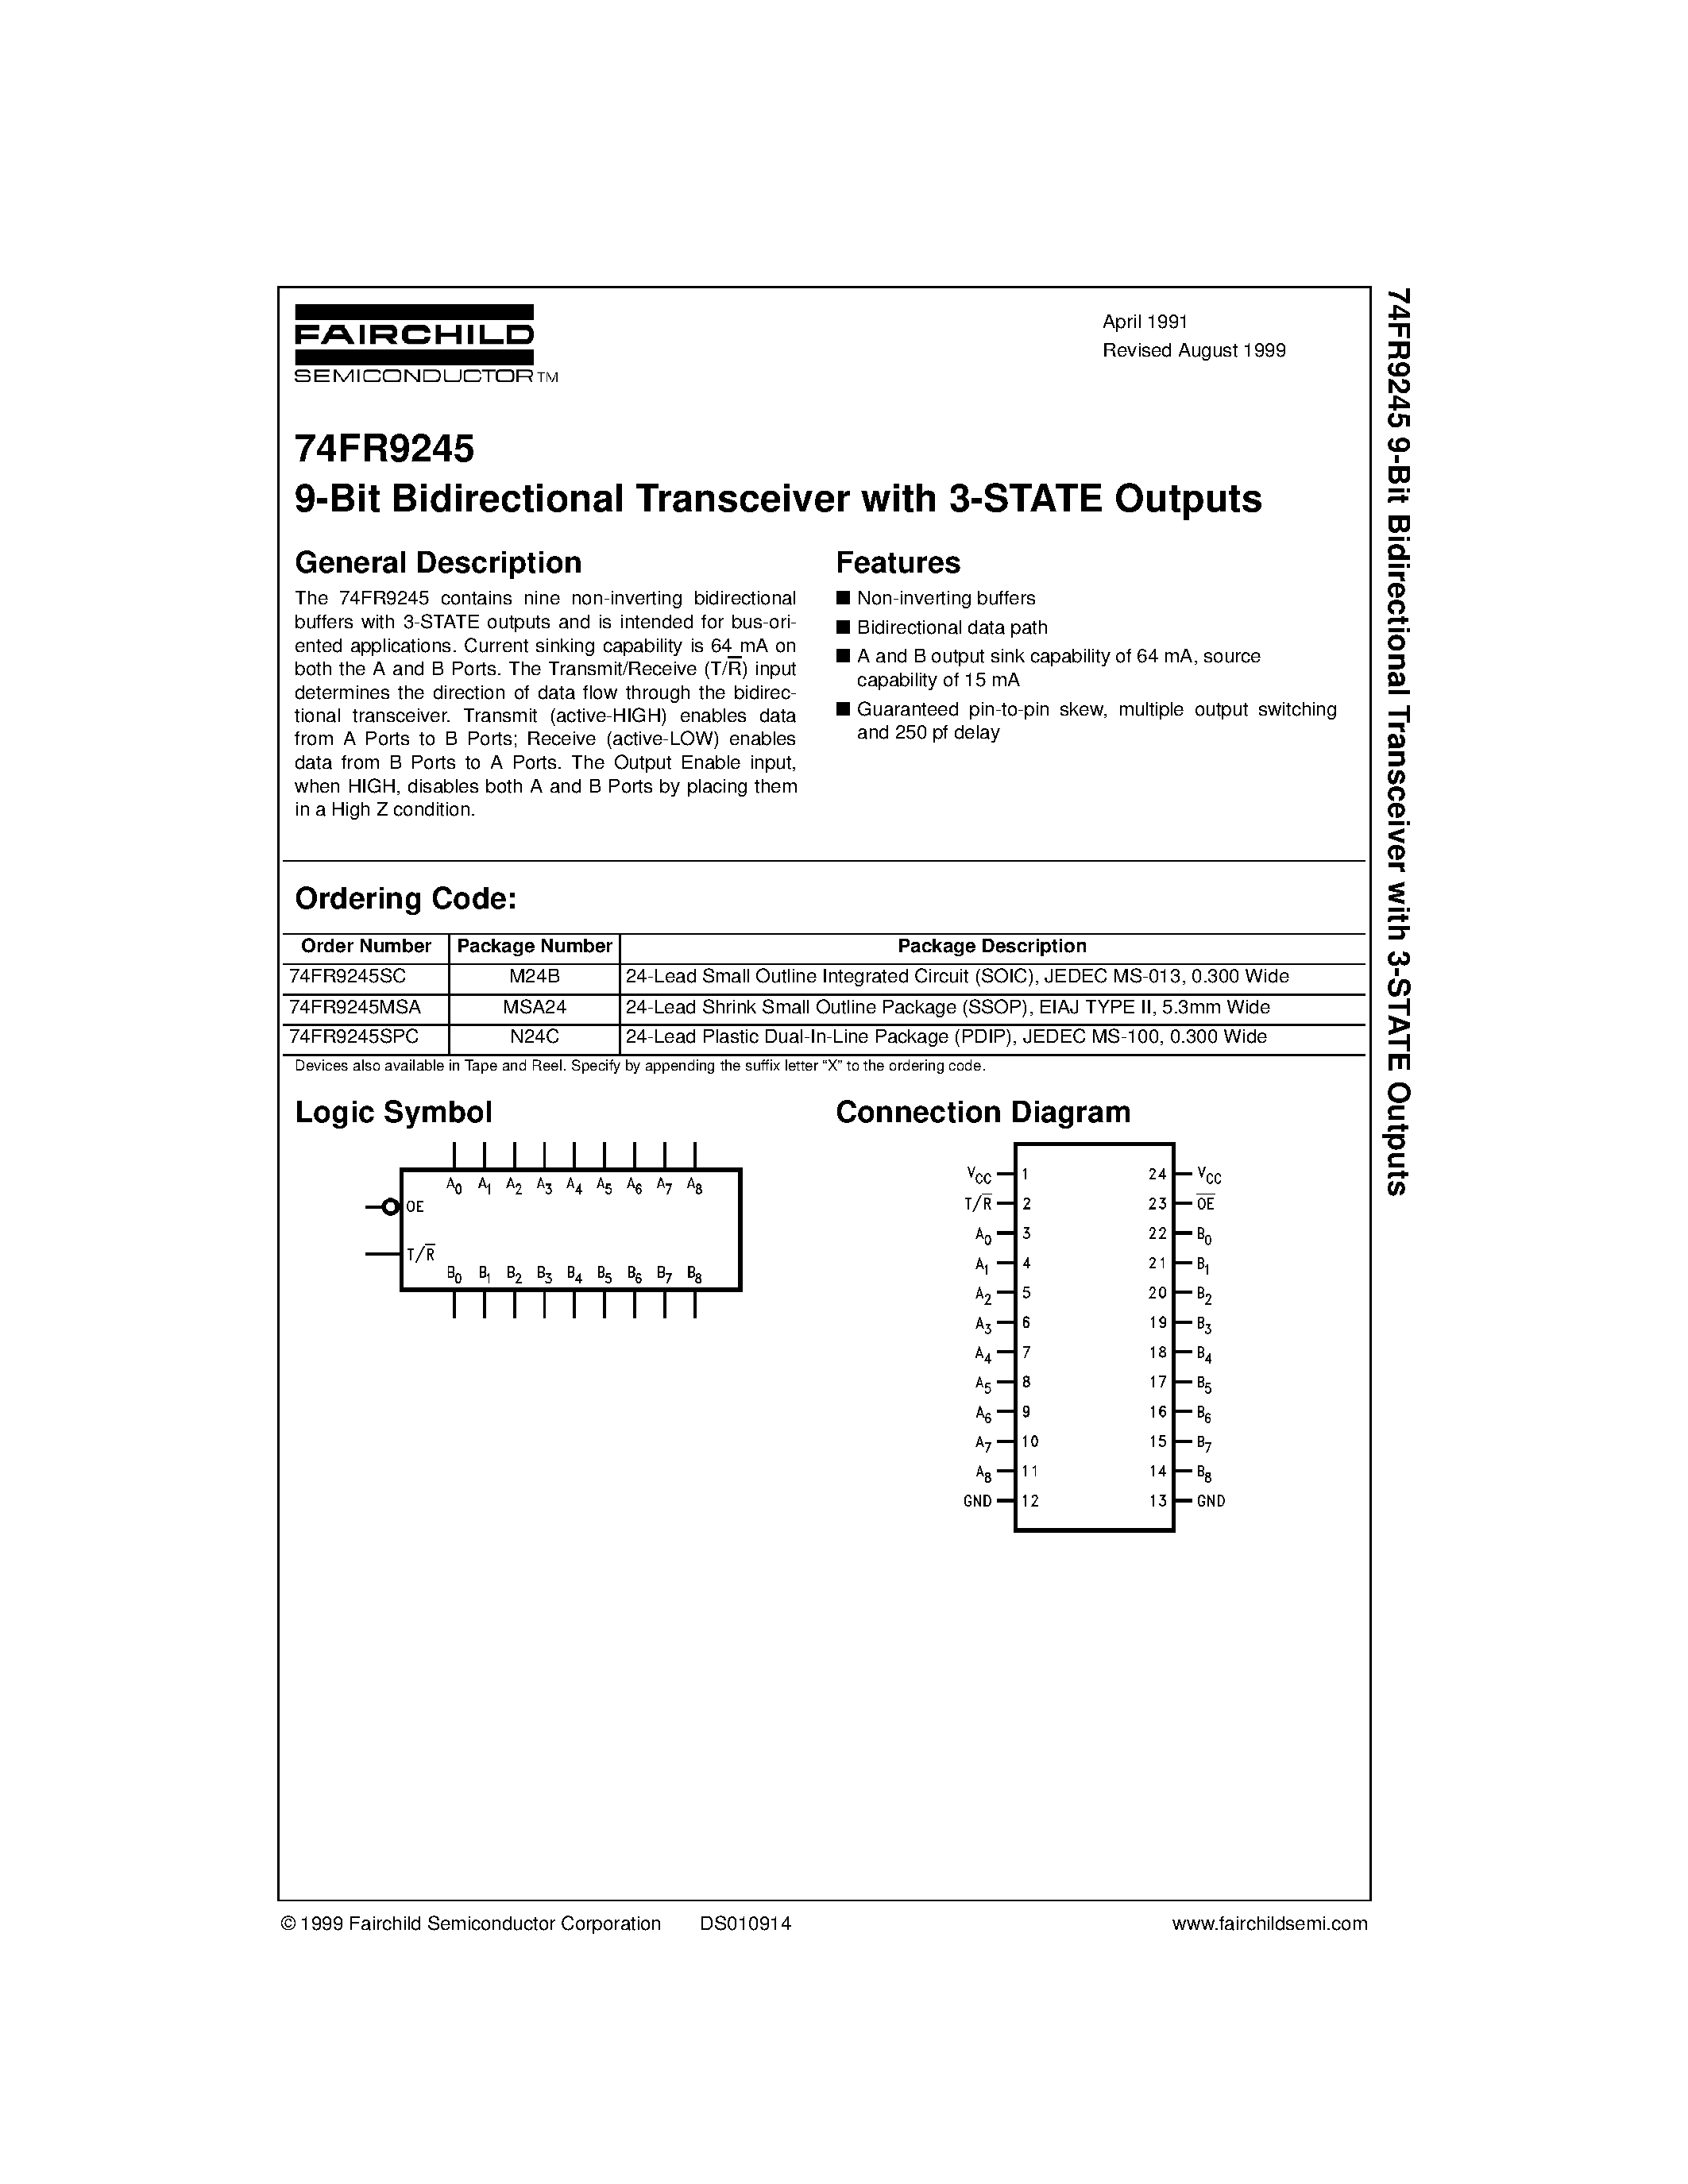 Datasheet 74FR9245SC - 9-Bit Bidirectional Transceiver with 3-STATE Outputs page 1